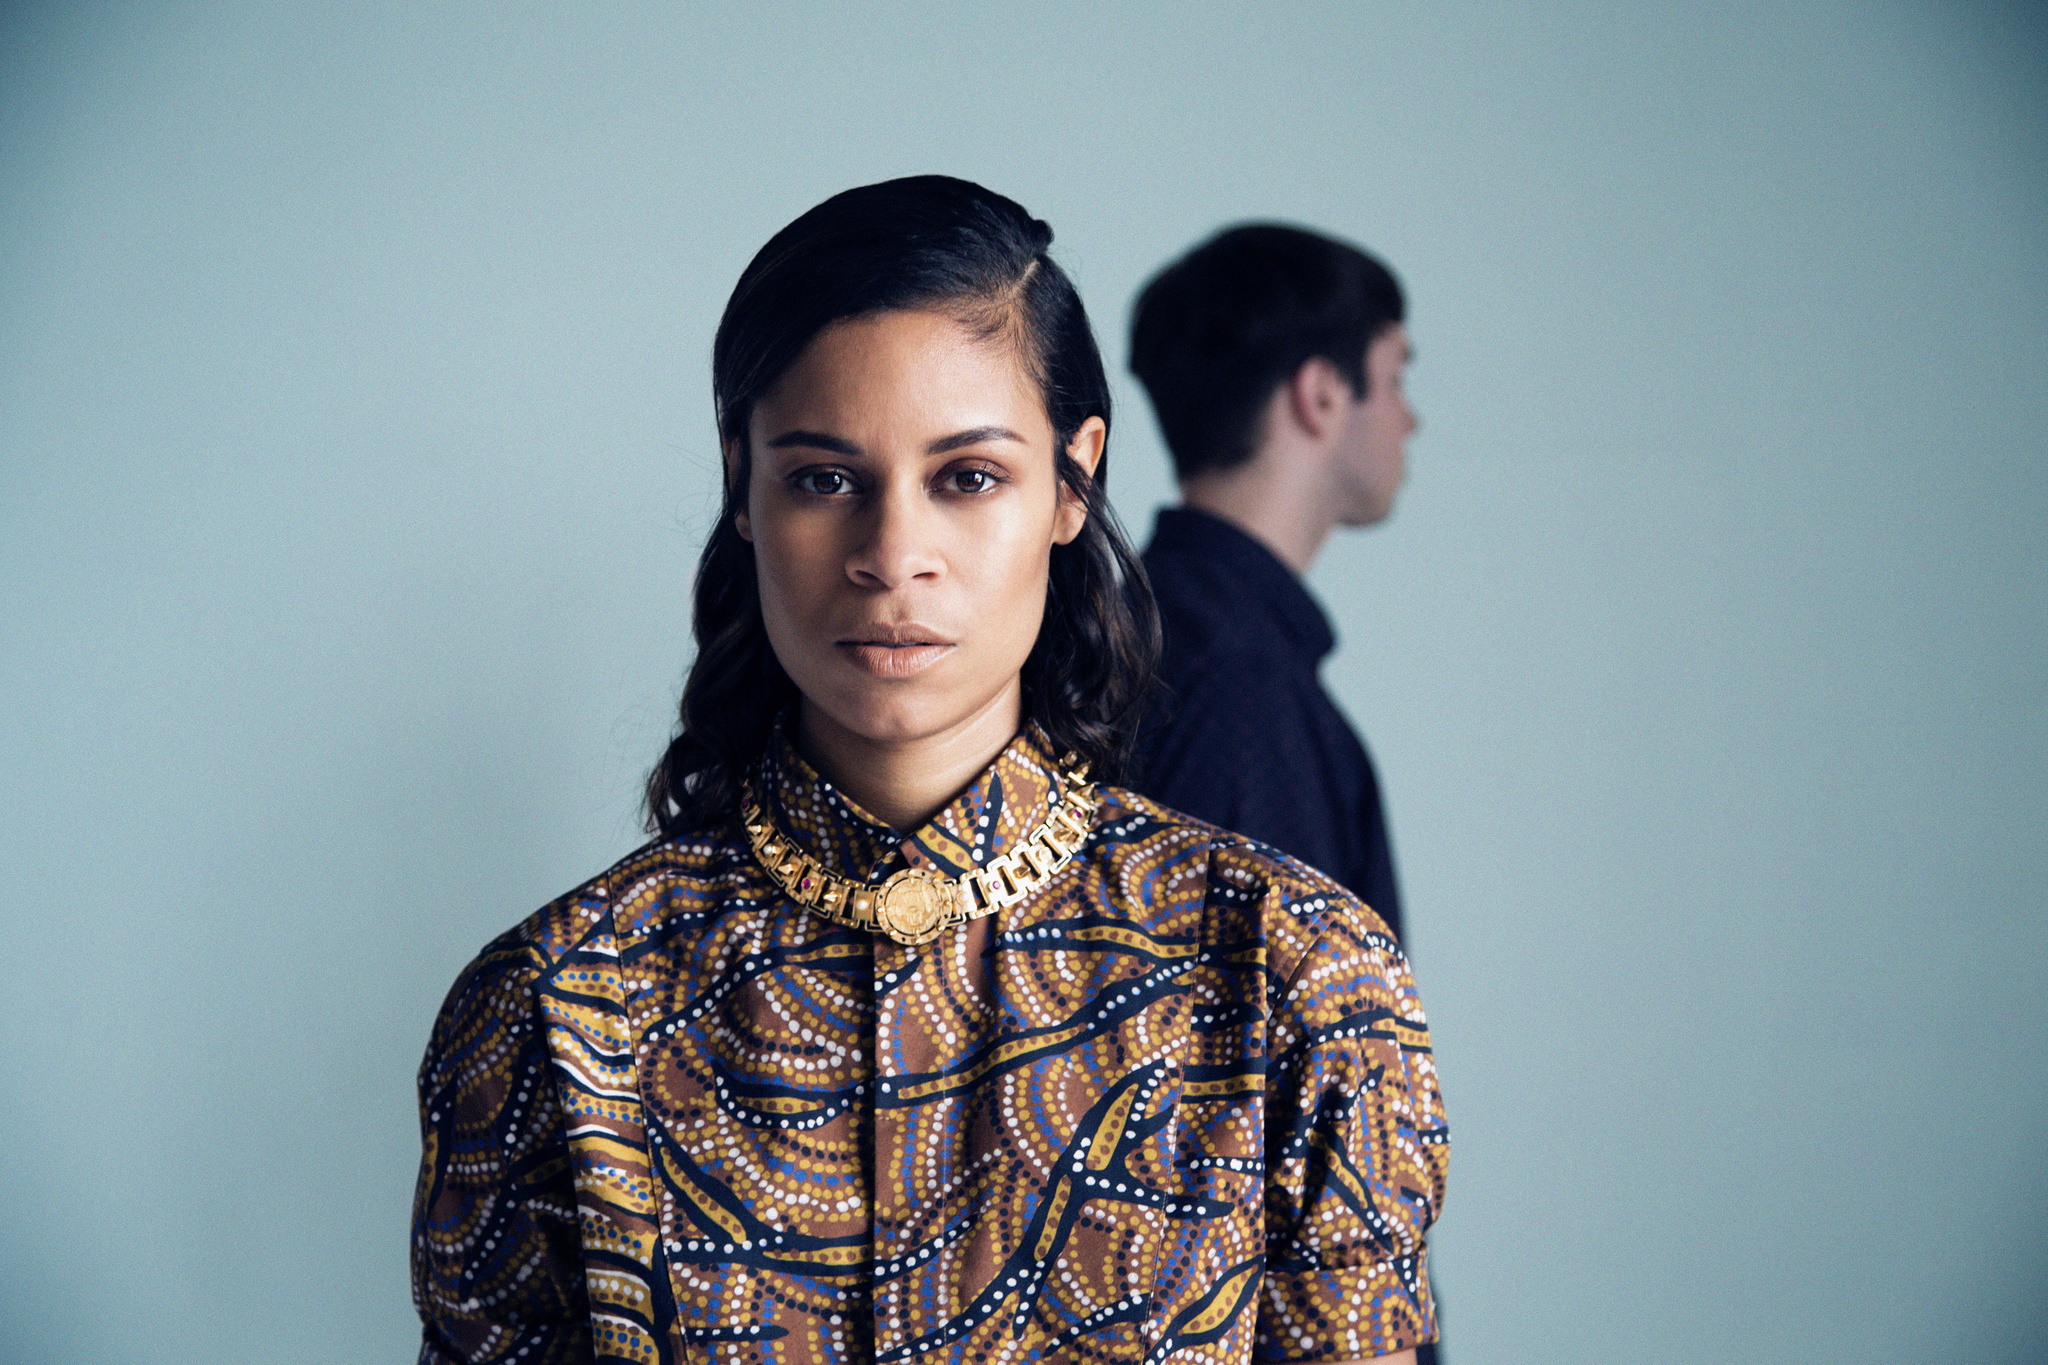 Alunageorge Hd Wallpaper posted by Ryan Anderson 2050x1370